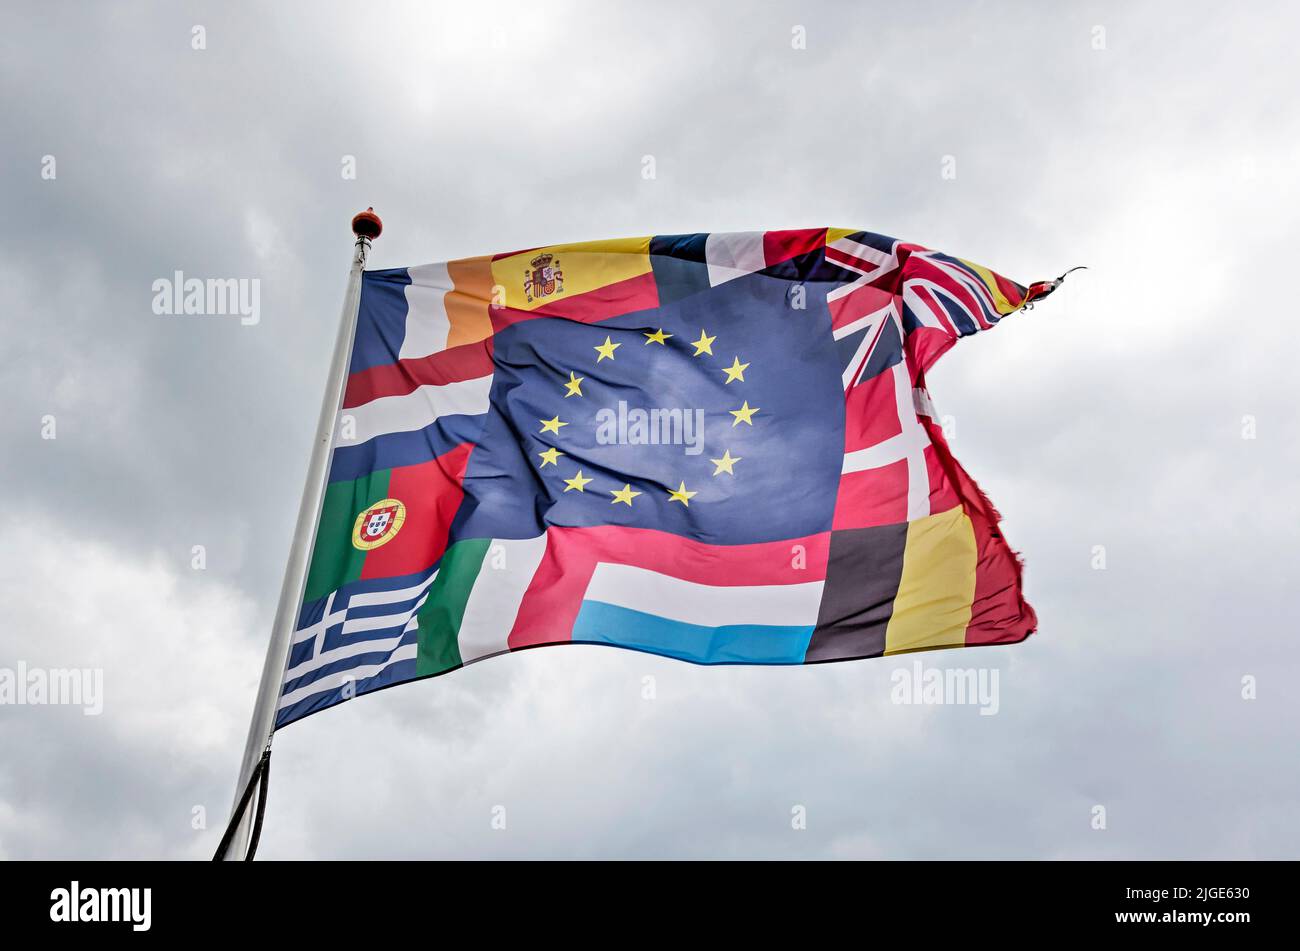 Numansdorp, The Netherlands, July 3, 2022: large flag with yellow-blue flag of the European Union as well as flags of several other countries includin Stock Photo